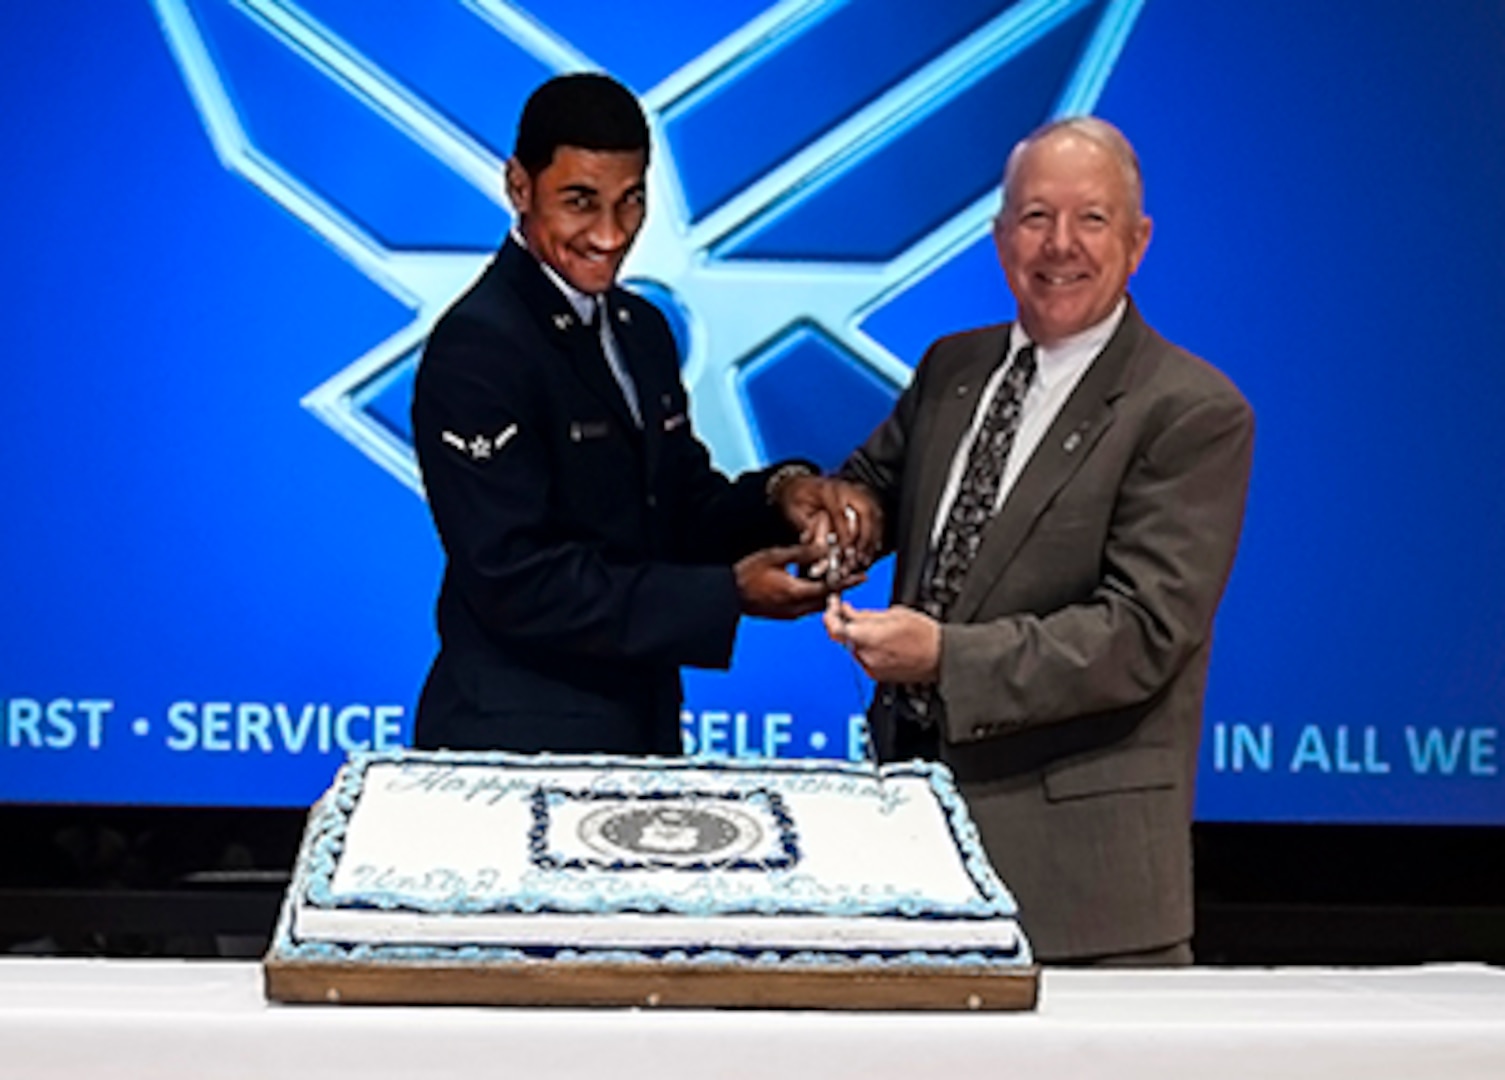 Airman Ivan Velazquez, 88th Air Base Wing, Wright-Patterson Air Force Base, representing the youngest Airman, cuts the cake along with James McClaugherty, Land and Maritime deputy commander and a retired Air Force colonel, at DLA Land and Maritime's Air Force birthday party Sept. 17 in the Building 20 auditorium.